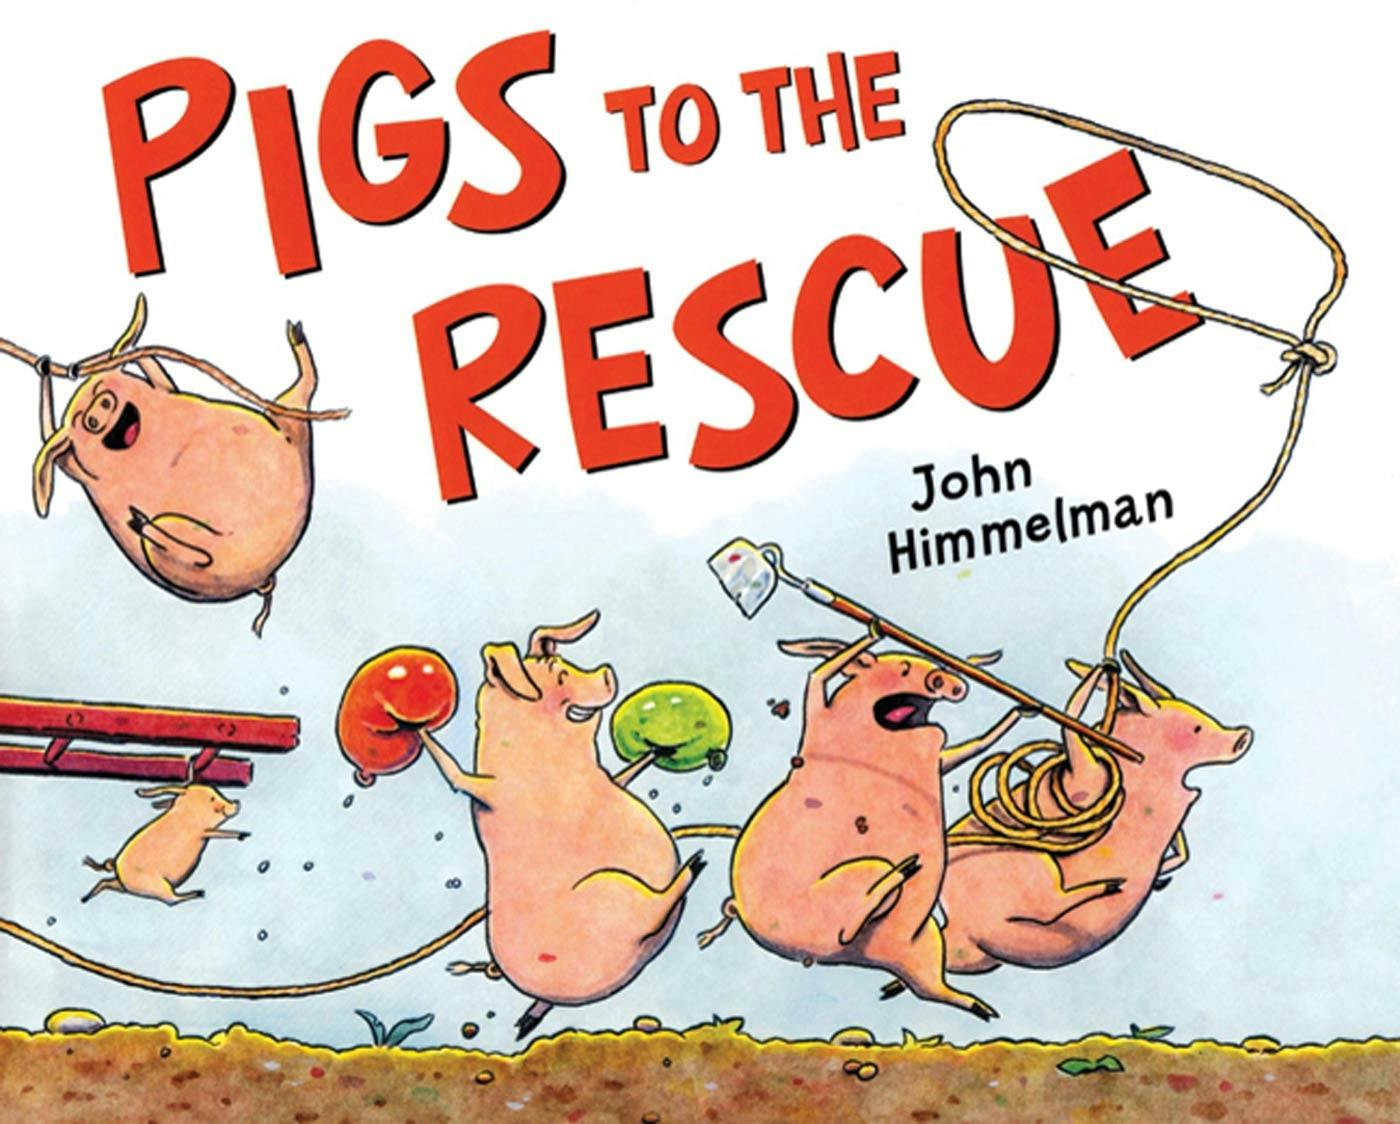 Image of Pigs to the Rescue